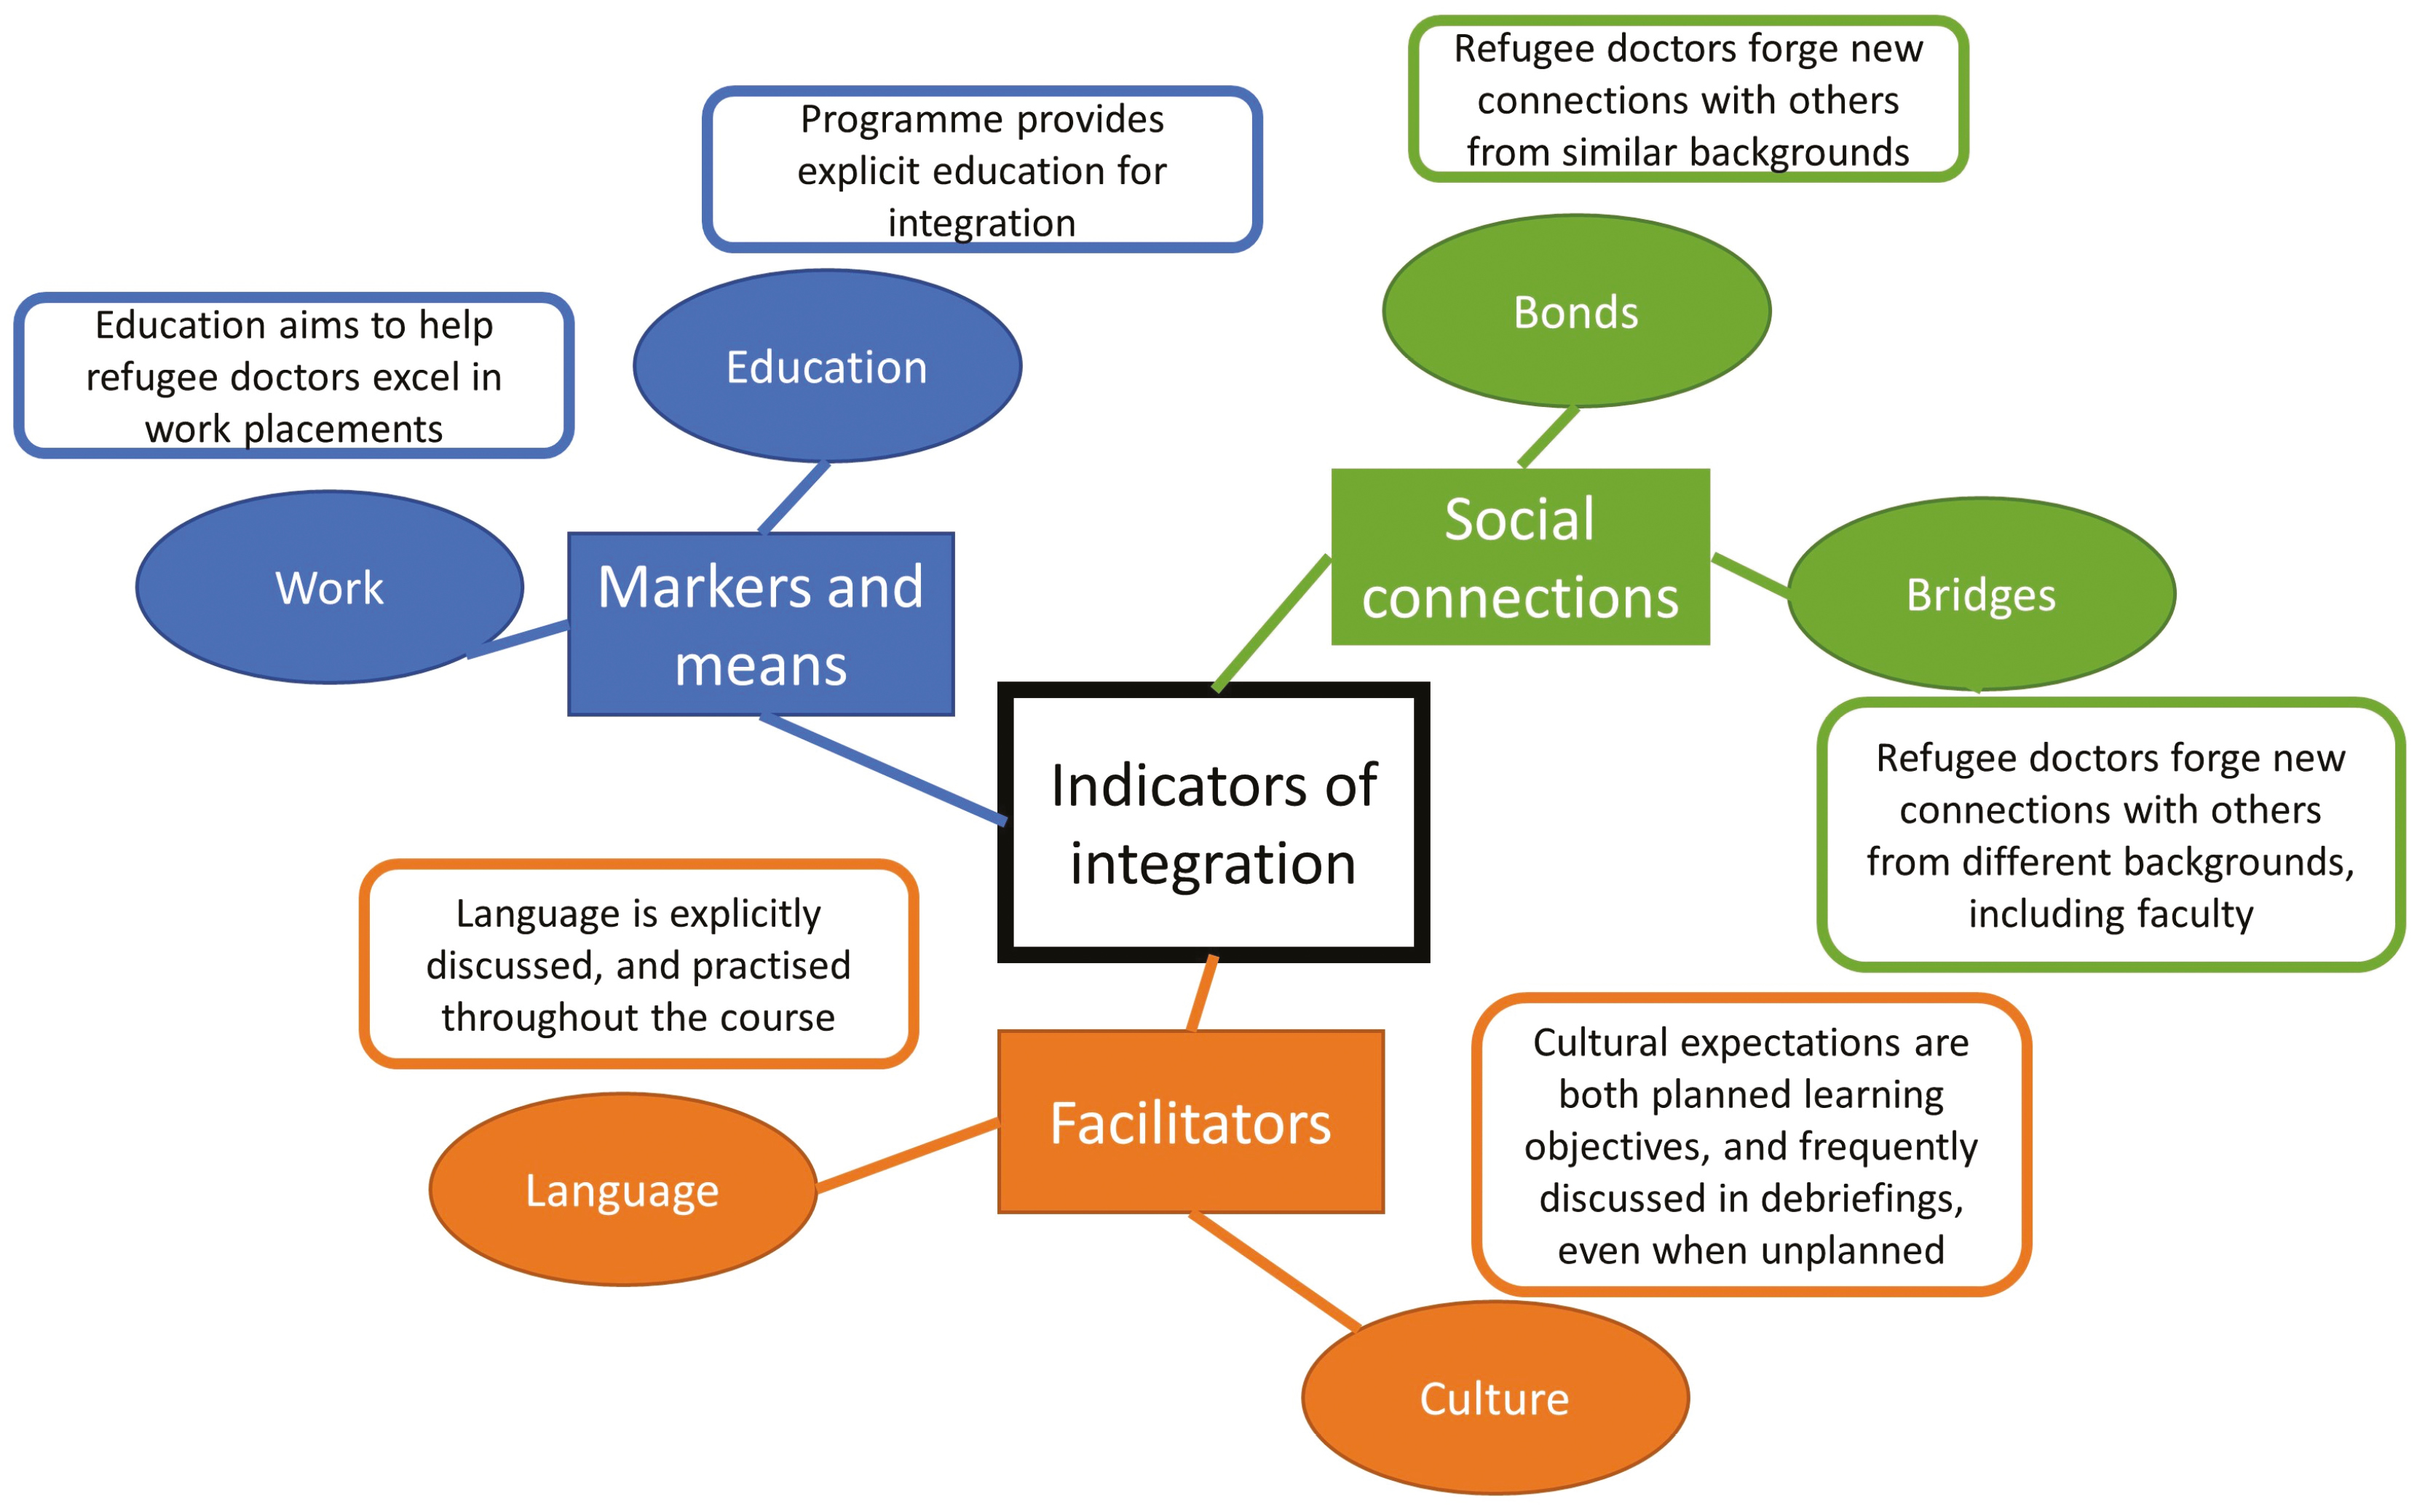 Domains of the Home Office ‘indicators of integration framework’ that may be impacted by the refugee doctors’ simulation programme.